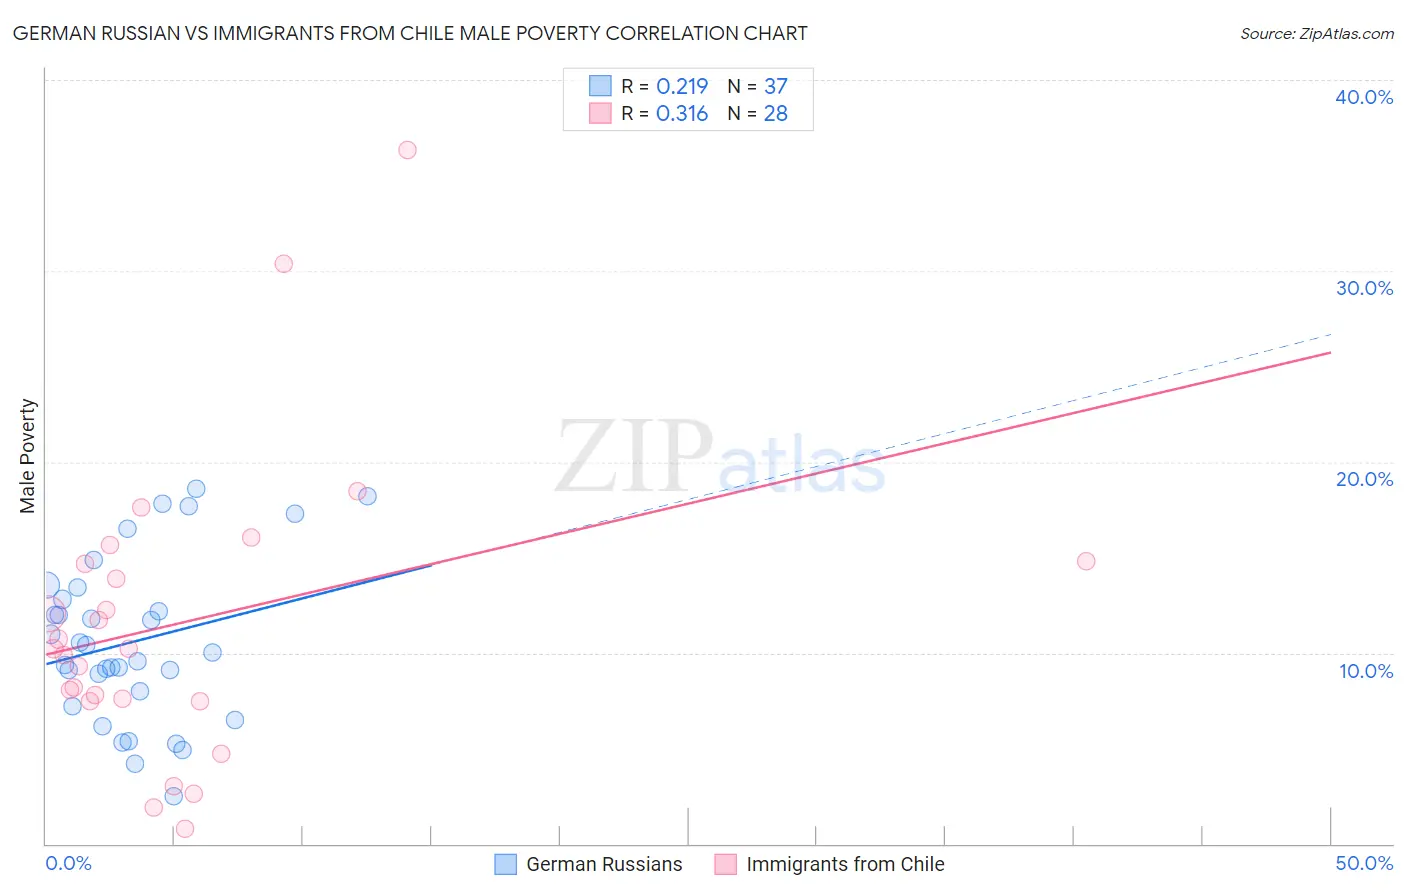 German Russian vs Immigrants from Chile Male Poverty